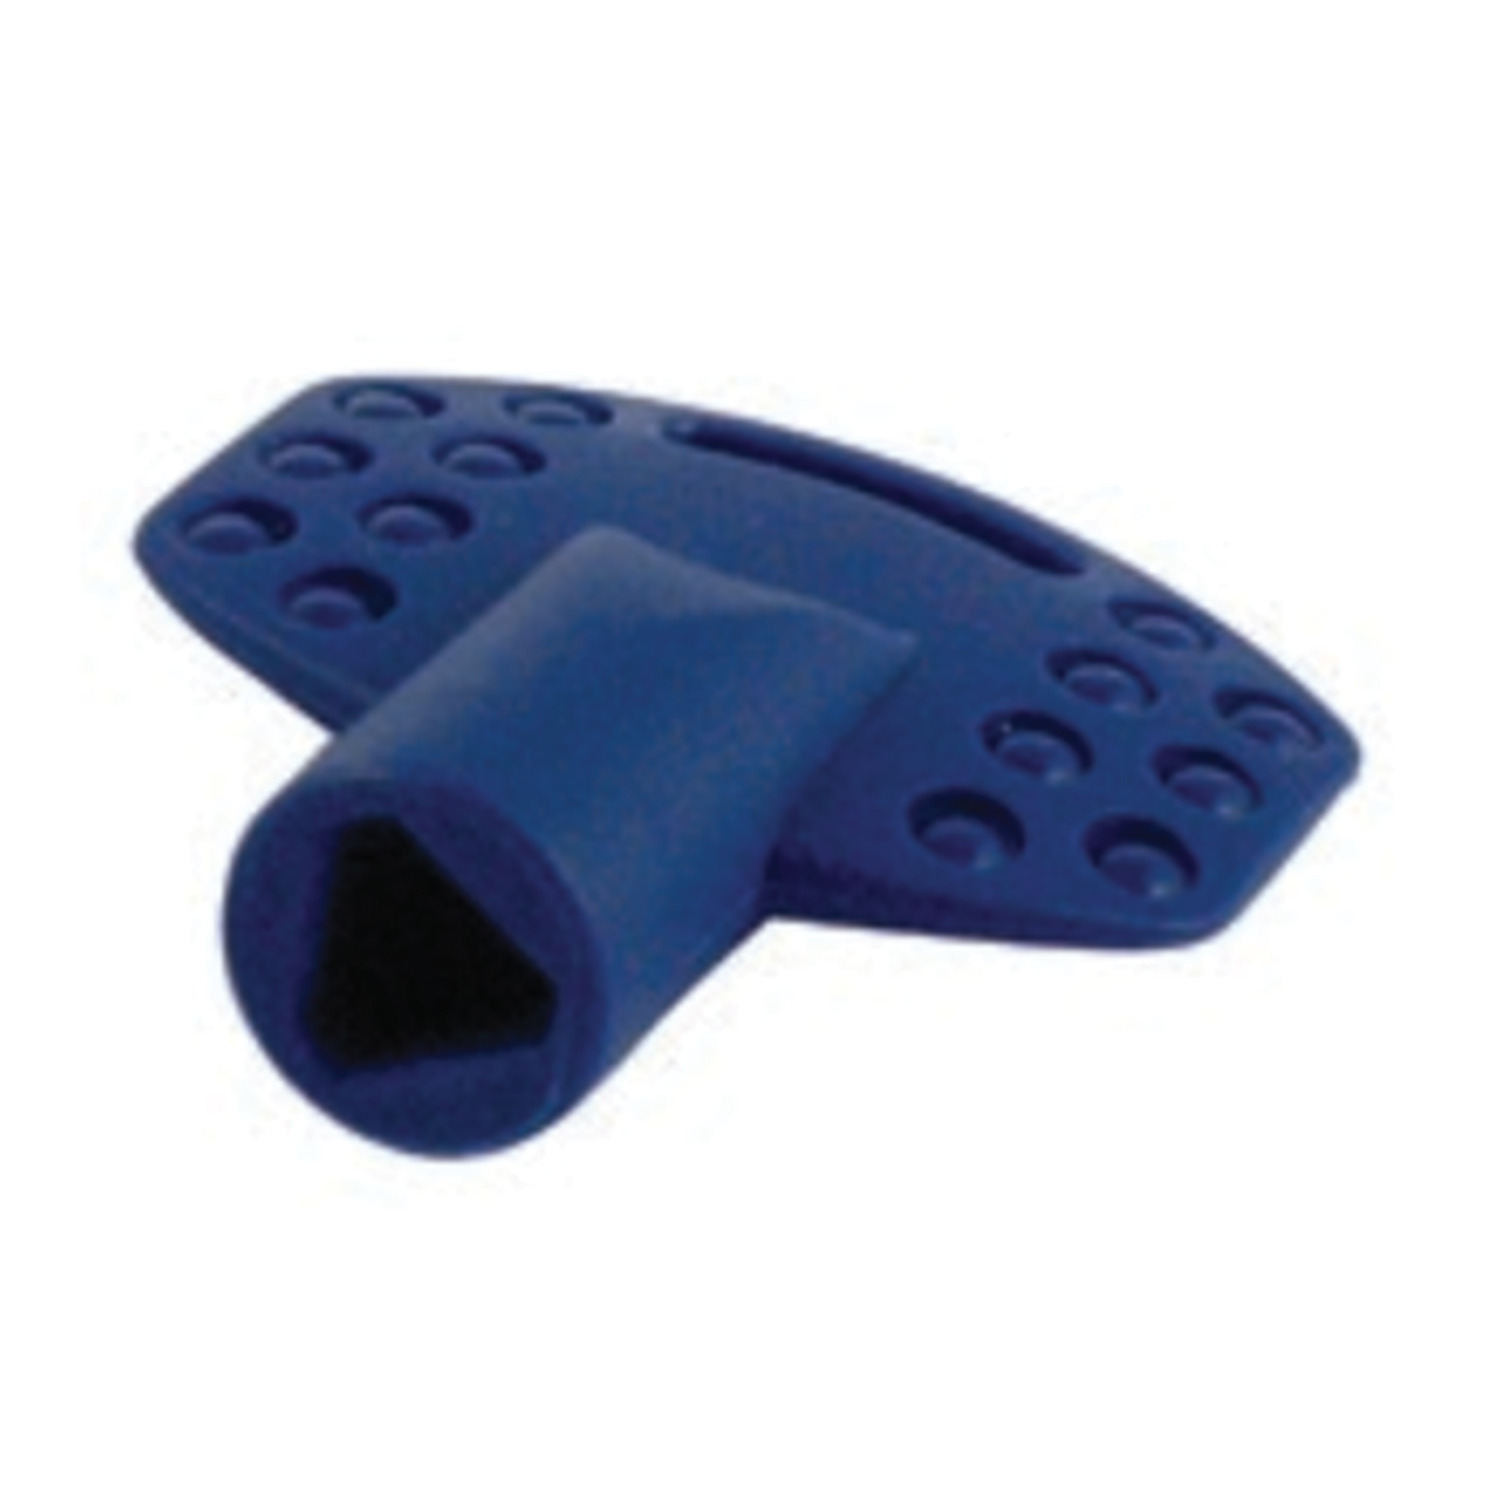 Product A0104, Keys for A1104 hygienic line / 